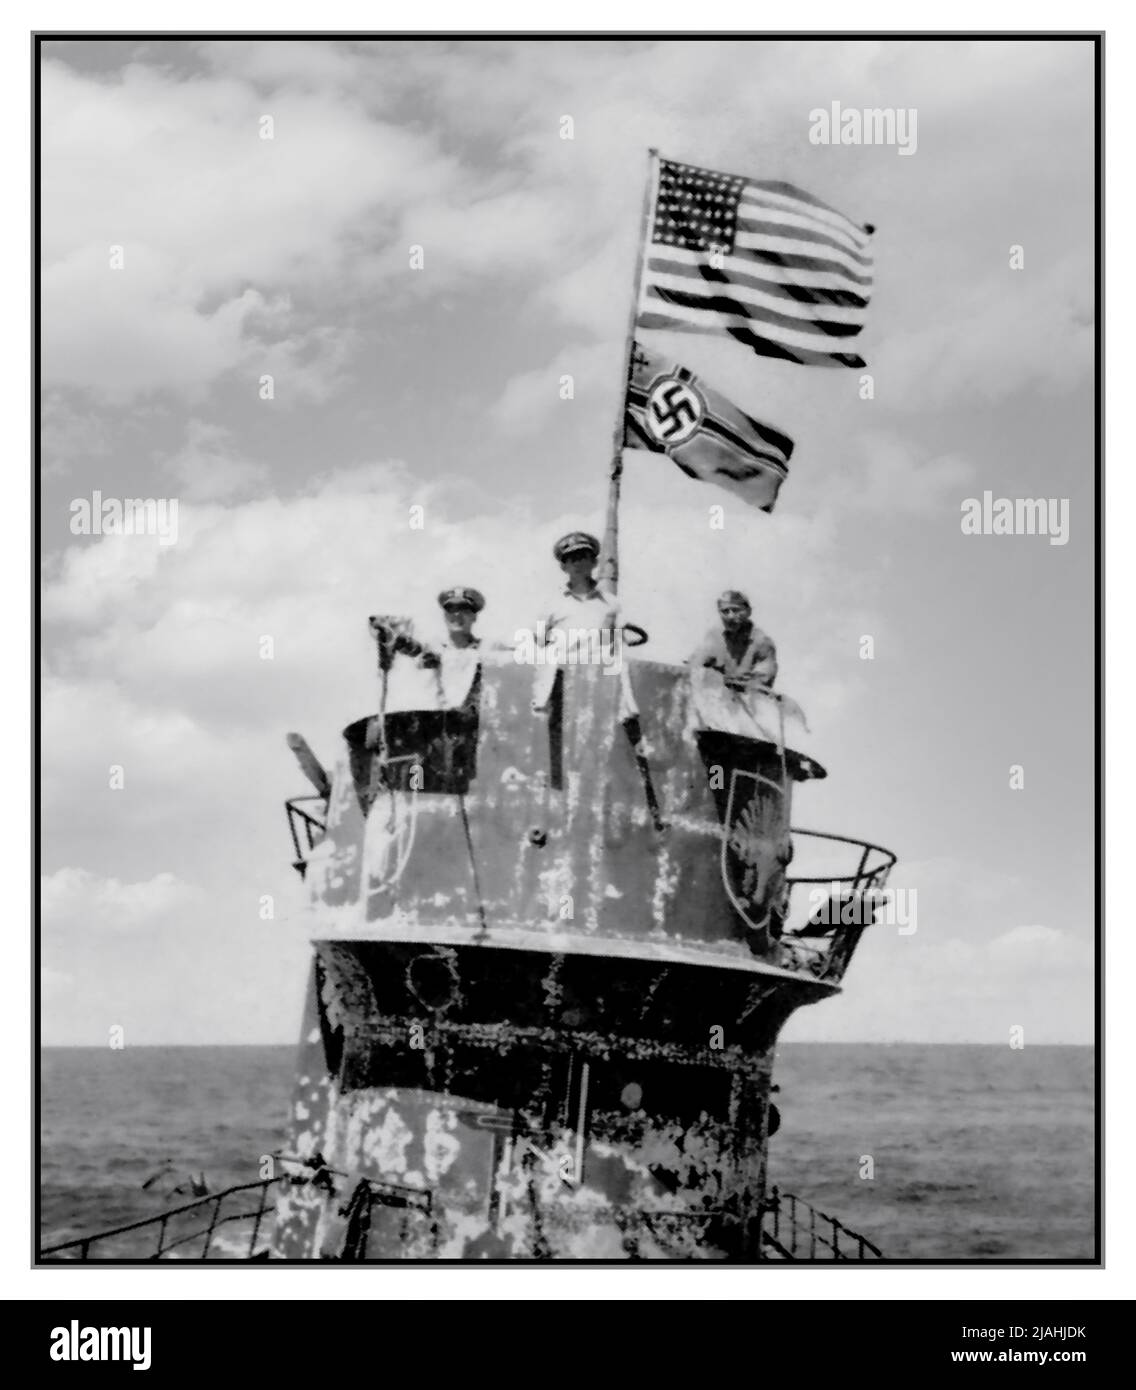 NAZI U-BOAT U.S. naval officers on the conning tower of the captured Nazi German submarine U-505 on 4 June 1944. The officers are, from right to left: Commander Earl Trosino, USNR; Captain Daniel V. Gallery, Jr., USN, Commanding Officer, USS Guadalcanal (CVE-60); and Lieutenant Junior Grade Albert L. David, USN, who was posthumously awarded the Medal of Honor for leading the boarding party that captured the submarine and carried out salvage operations. Note the United States flag flying above the German Navy Kreigsmarine ensign. U-505 was the first enemy warship captured on the high seas. Stock Photo